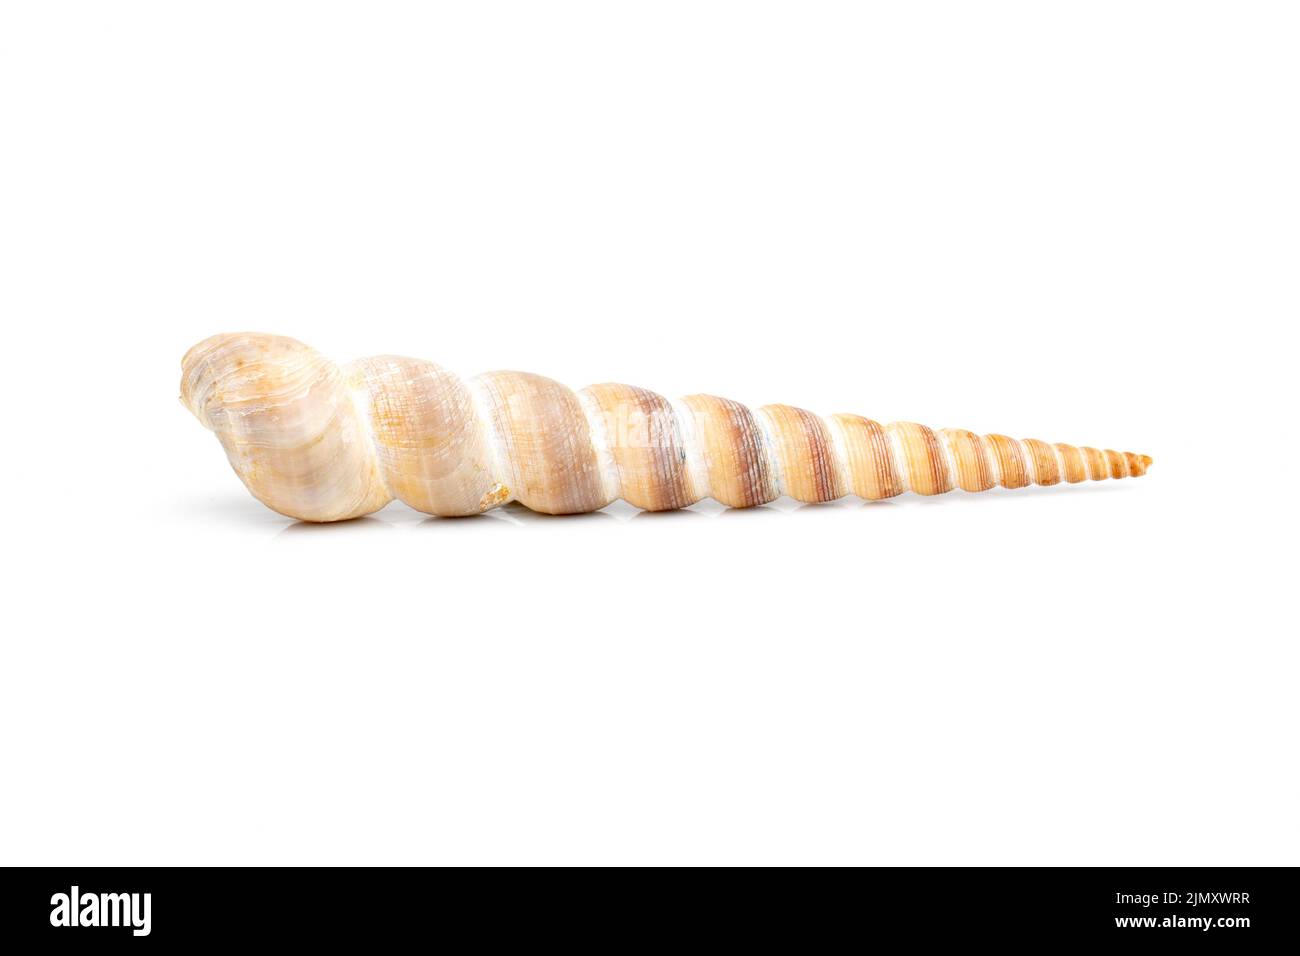 Image of pointed cone shell (Terebridae) on a white background. Undersea Animals. Sea Shells. Stock Photo